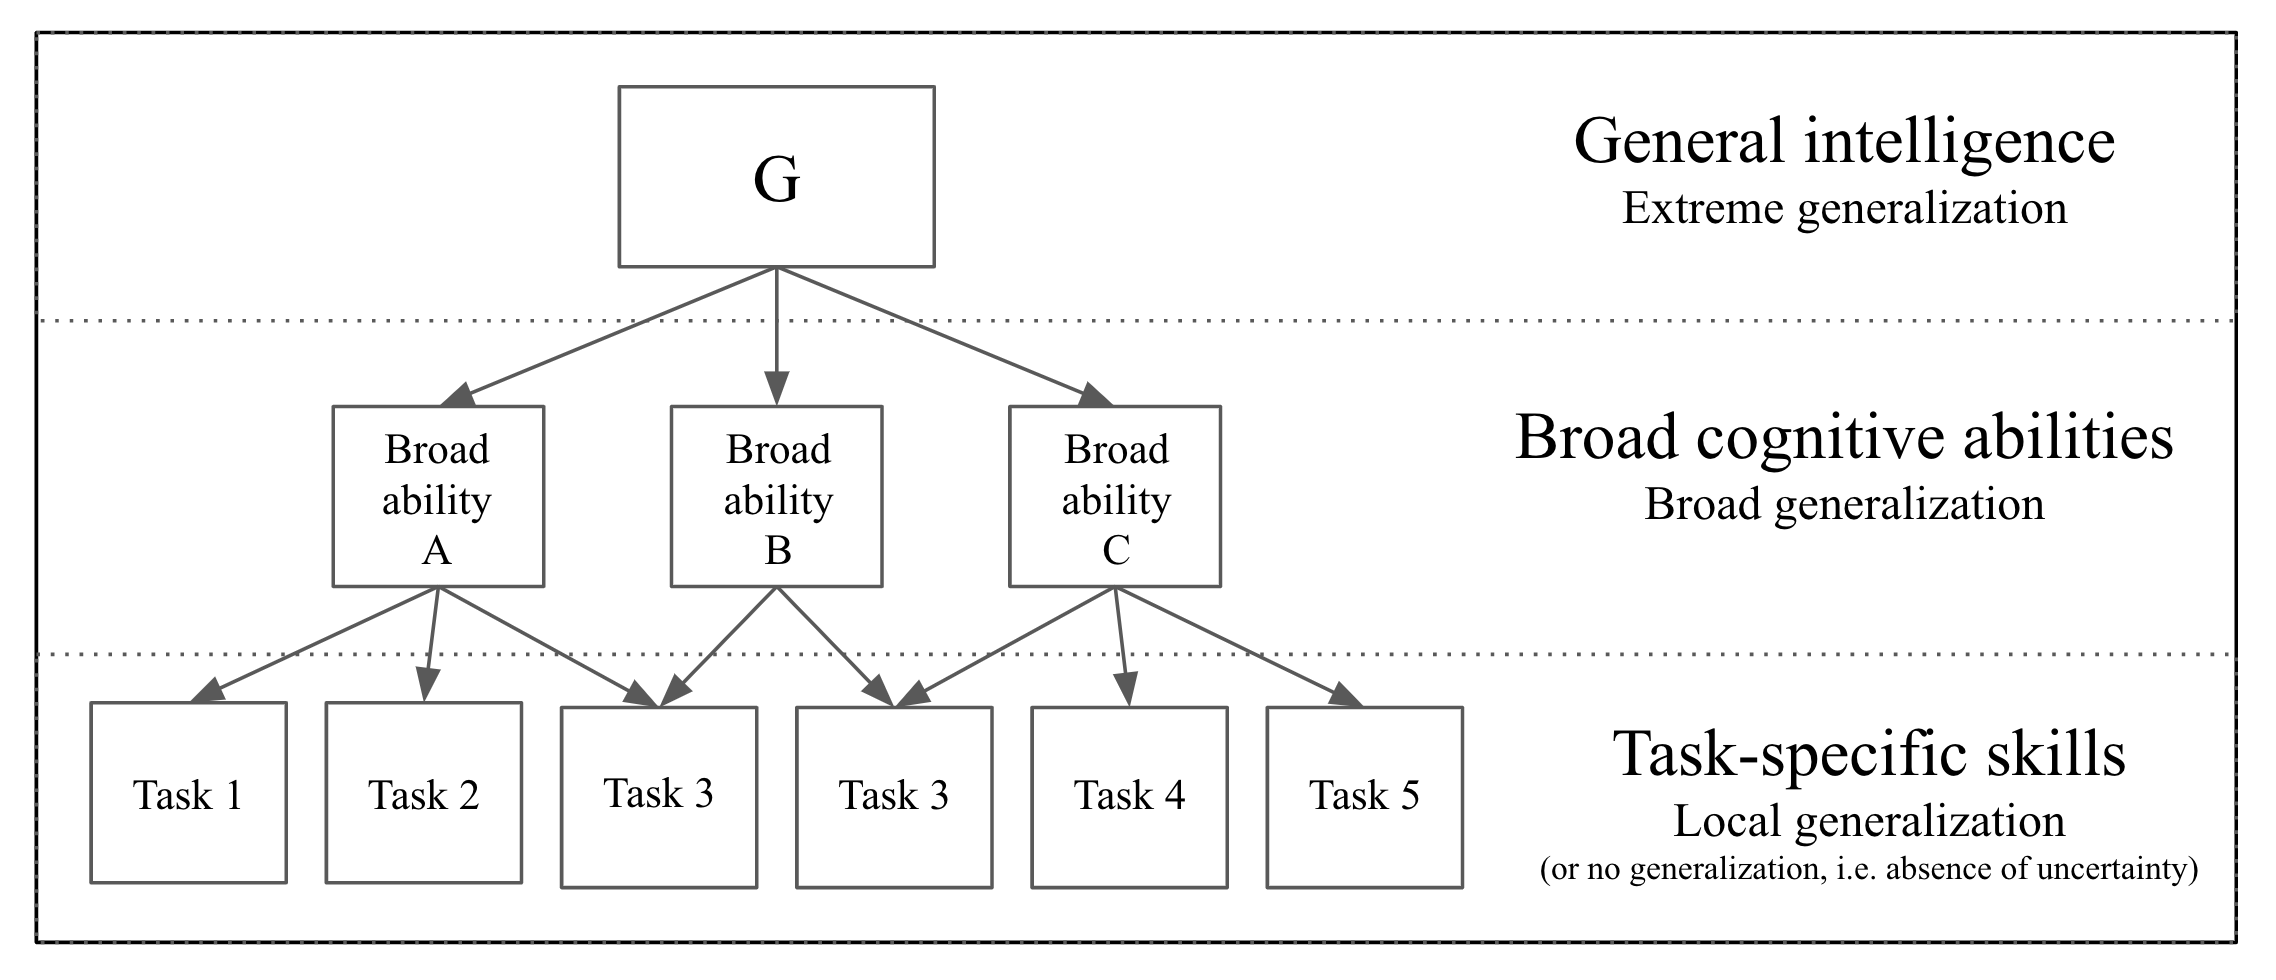 Hierarchical model of cognitive abilities and its mapping to the spectrum of generalization.